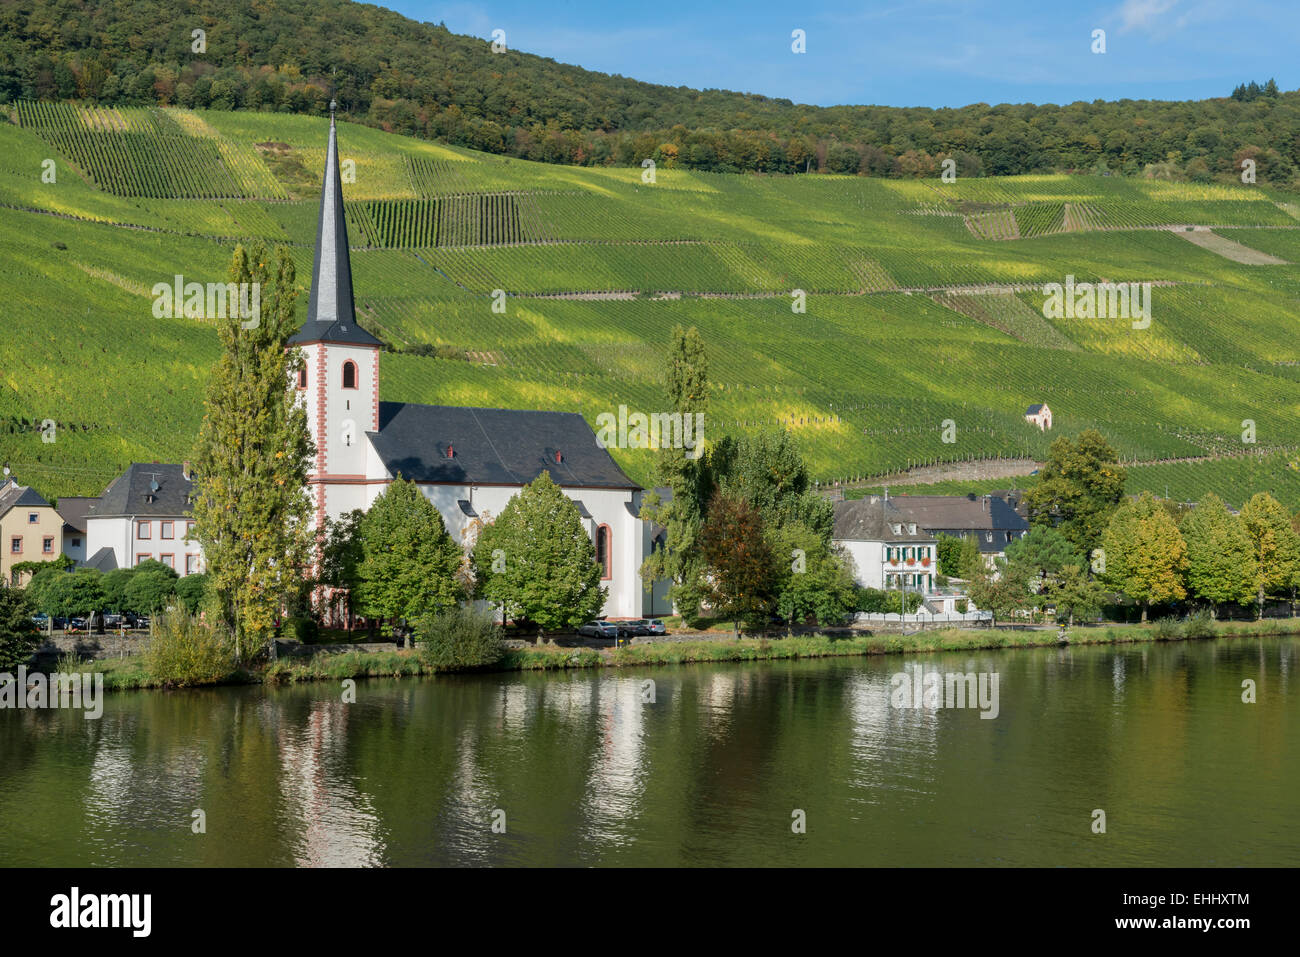 The wine village of Piesporter at the Mossele in Germany in autumn. Stock Photo